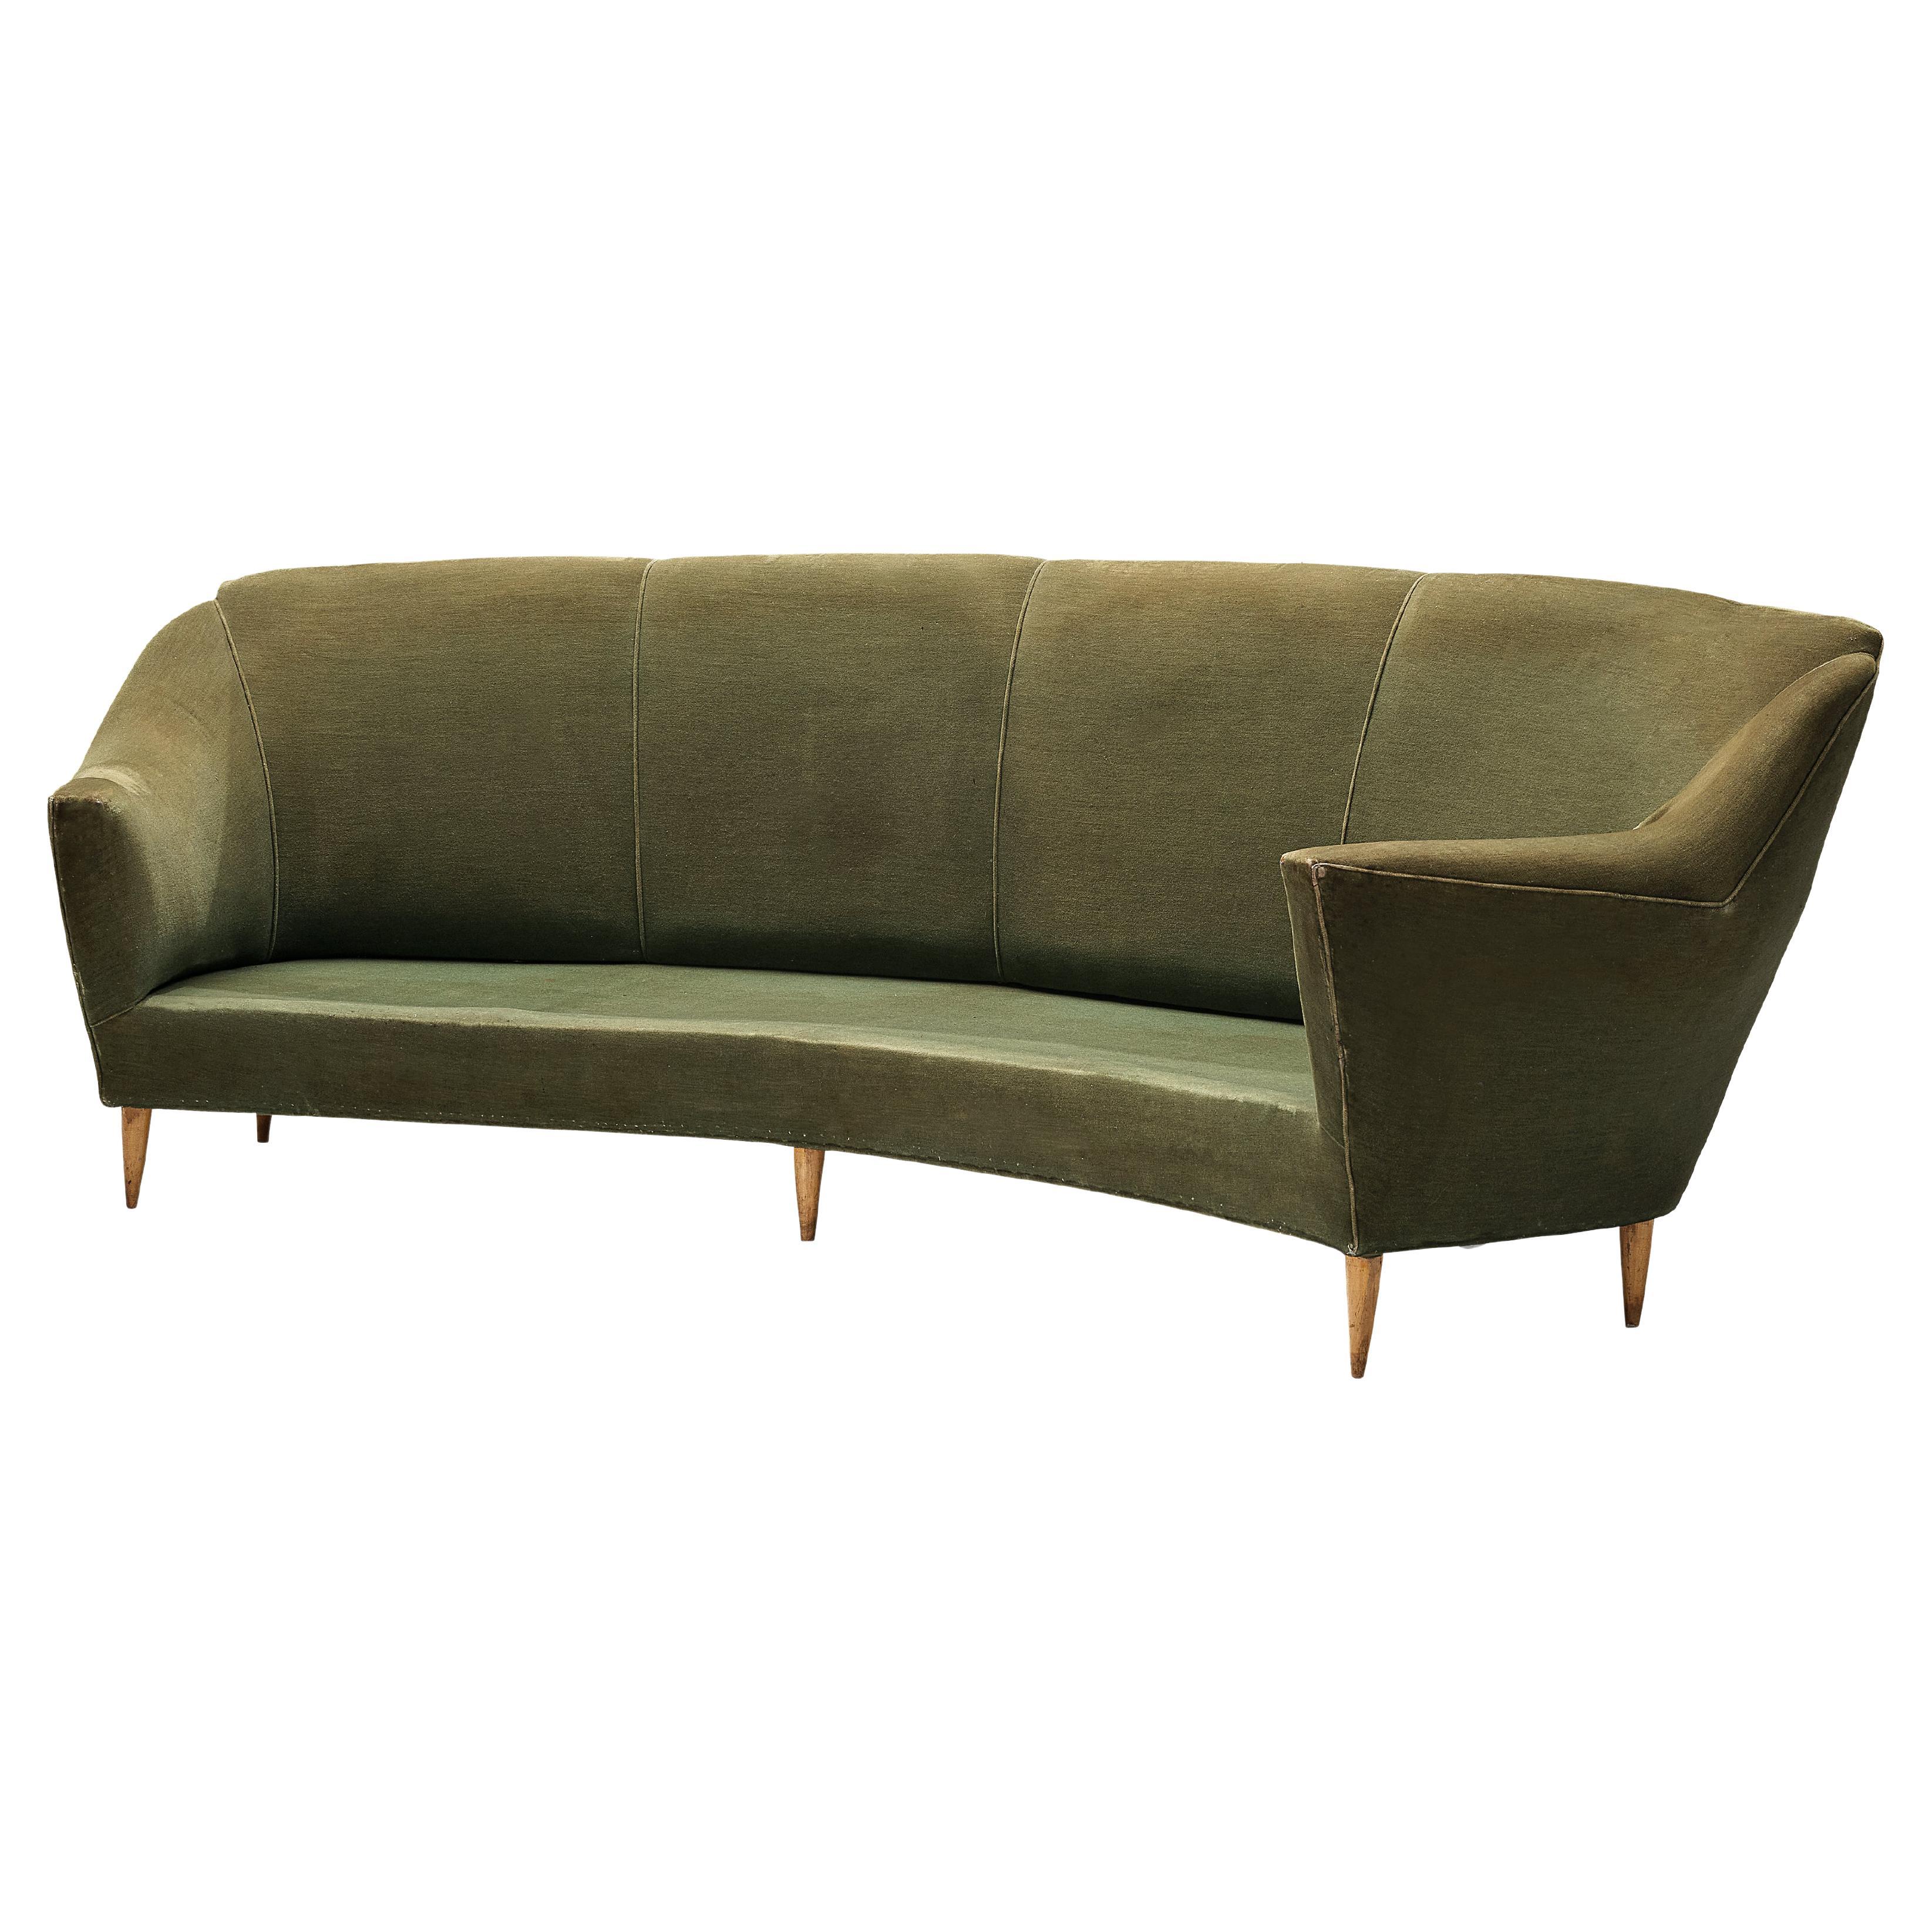 Italian Curved Three-Seat Sofa in Light Green Upholstery For Sale